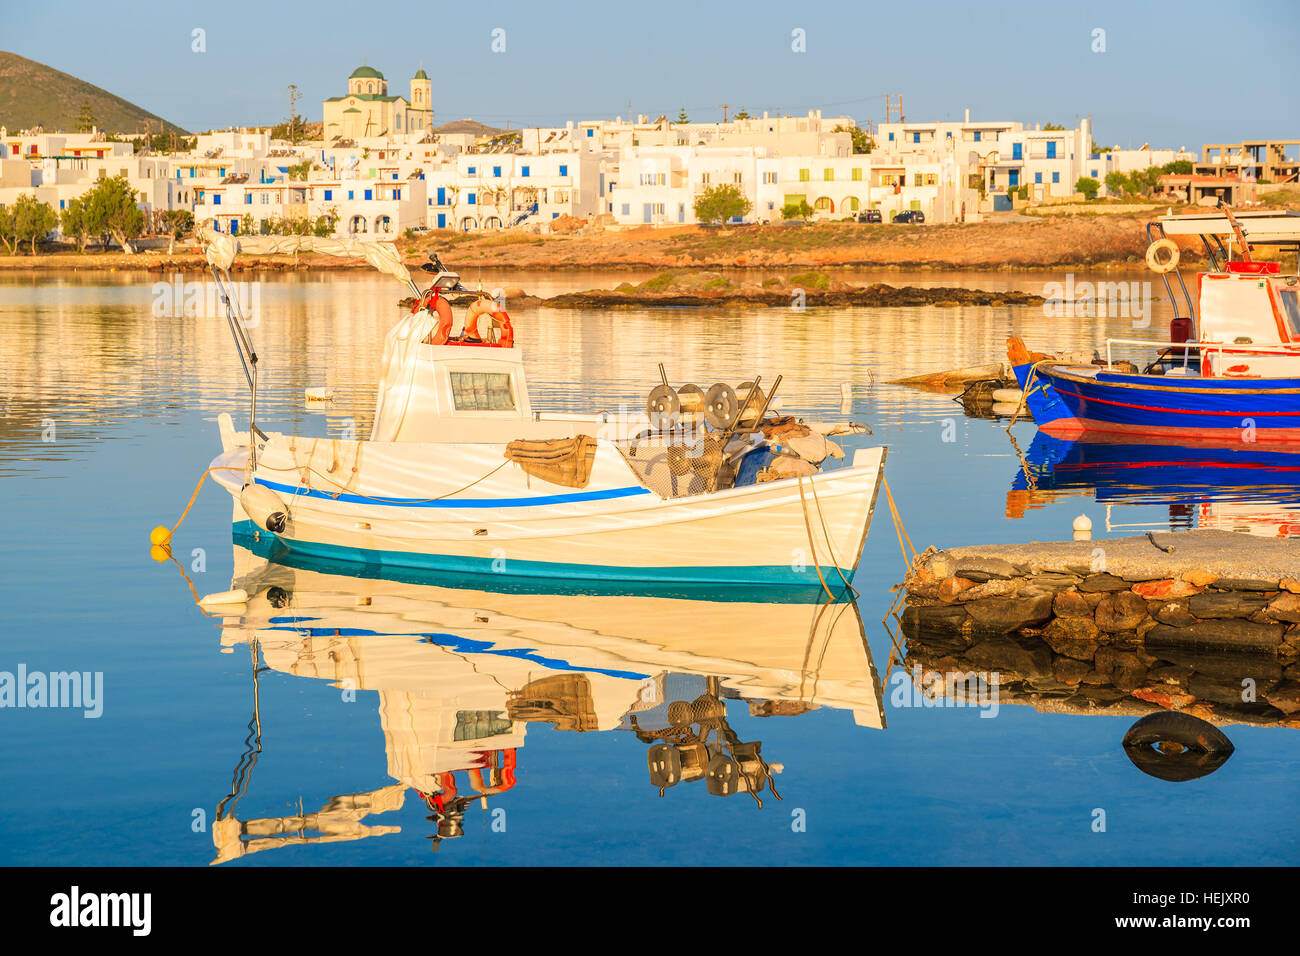 Fishing boat in Naoussa port at sunrise time, Paros island, Cyclades, Greece Stock Photo